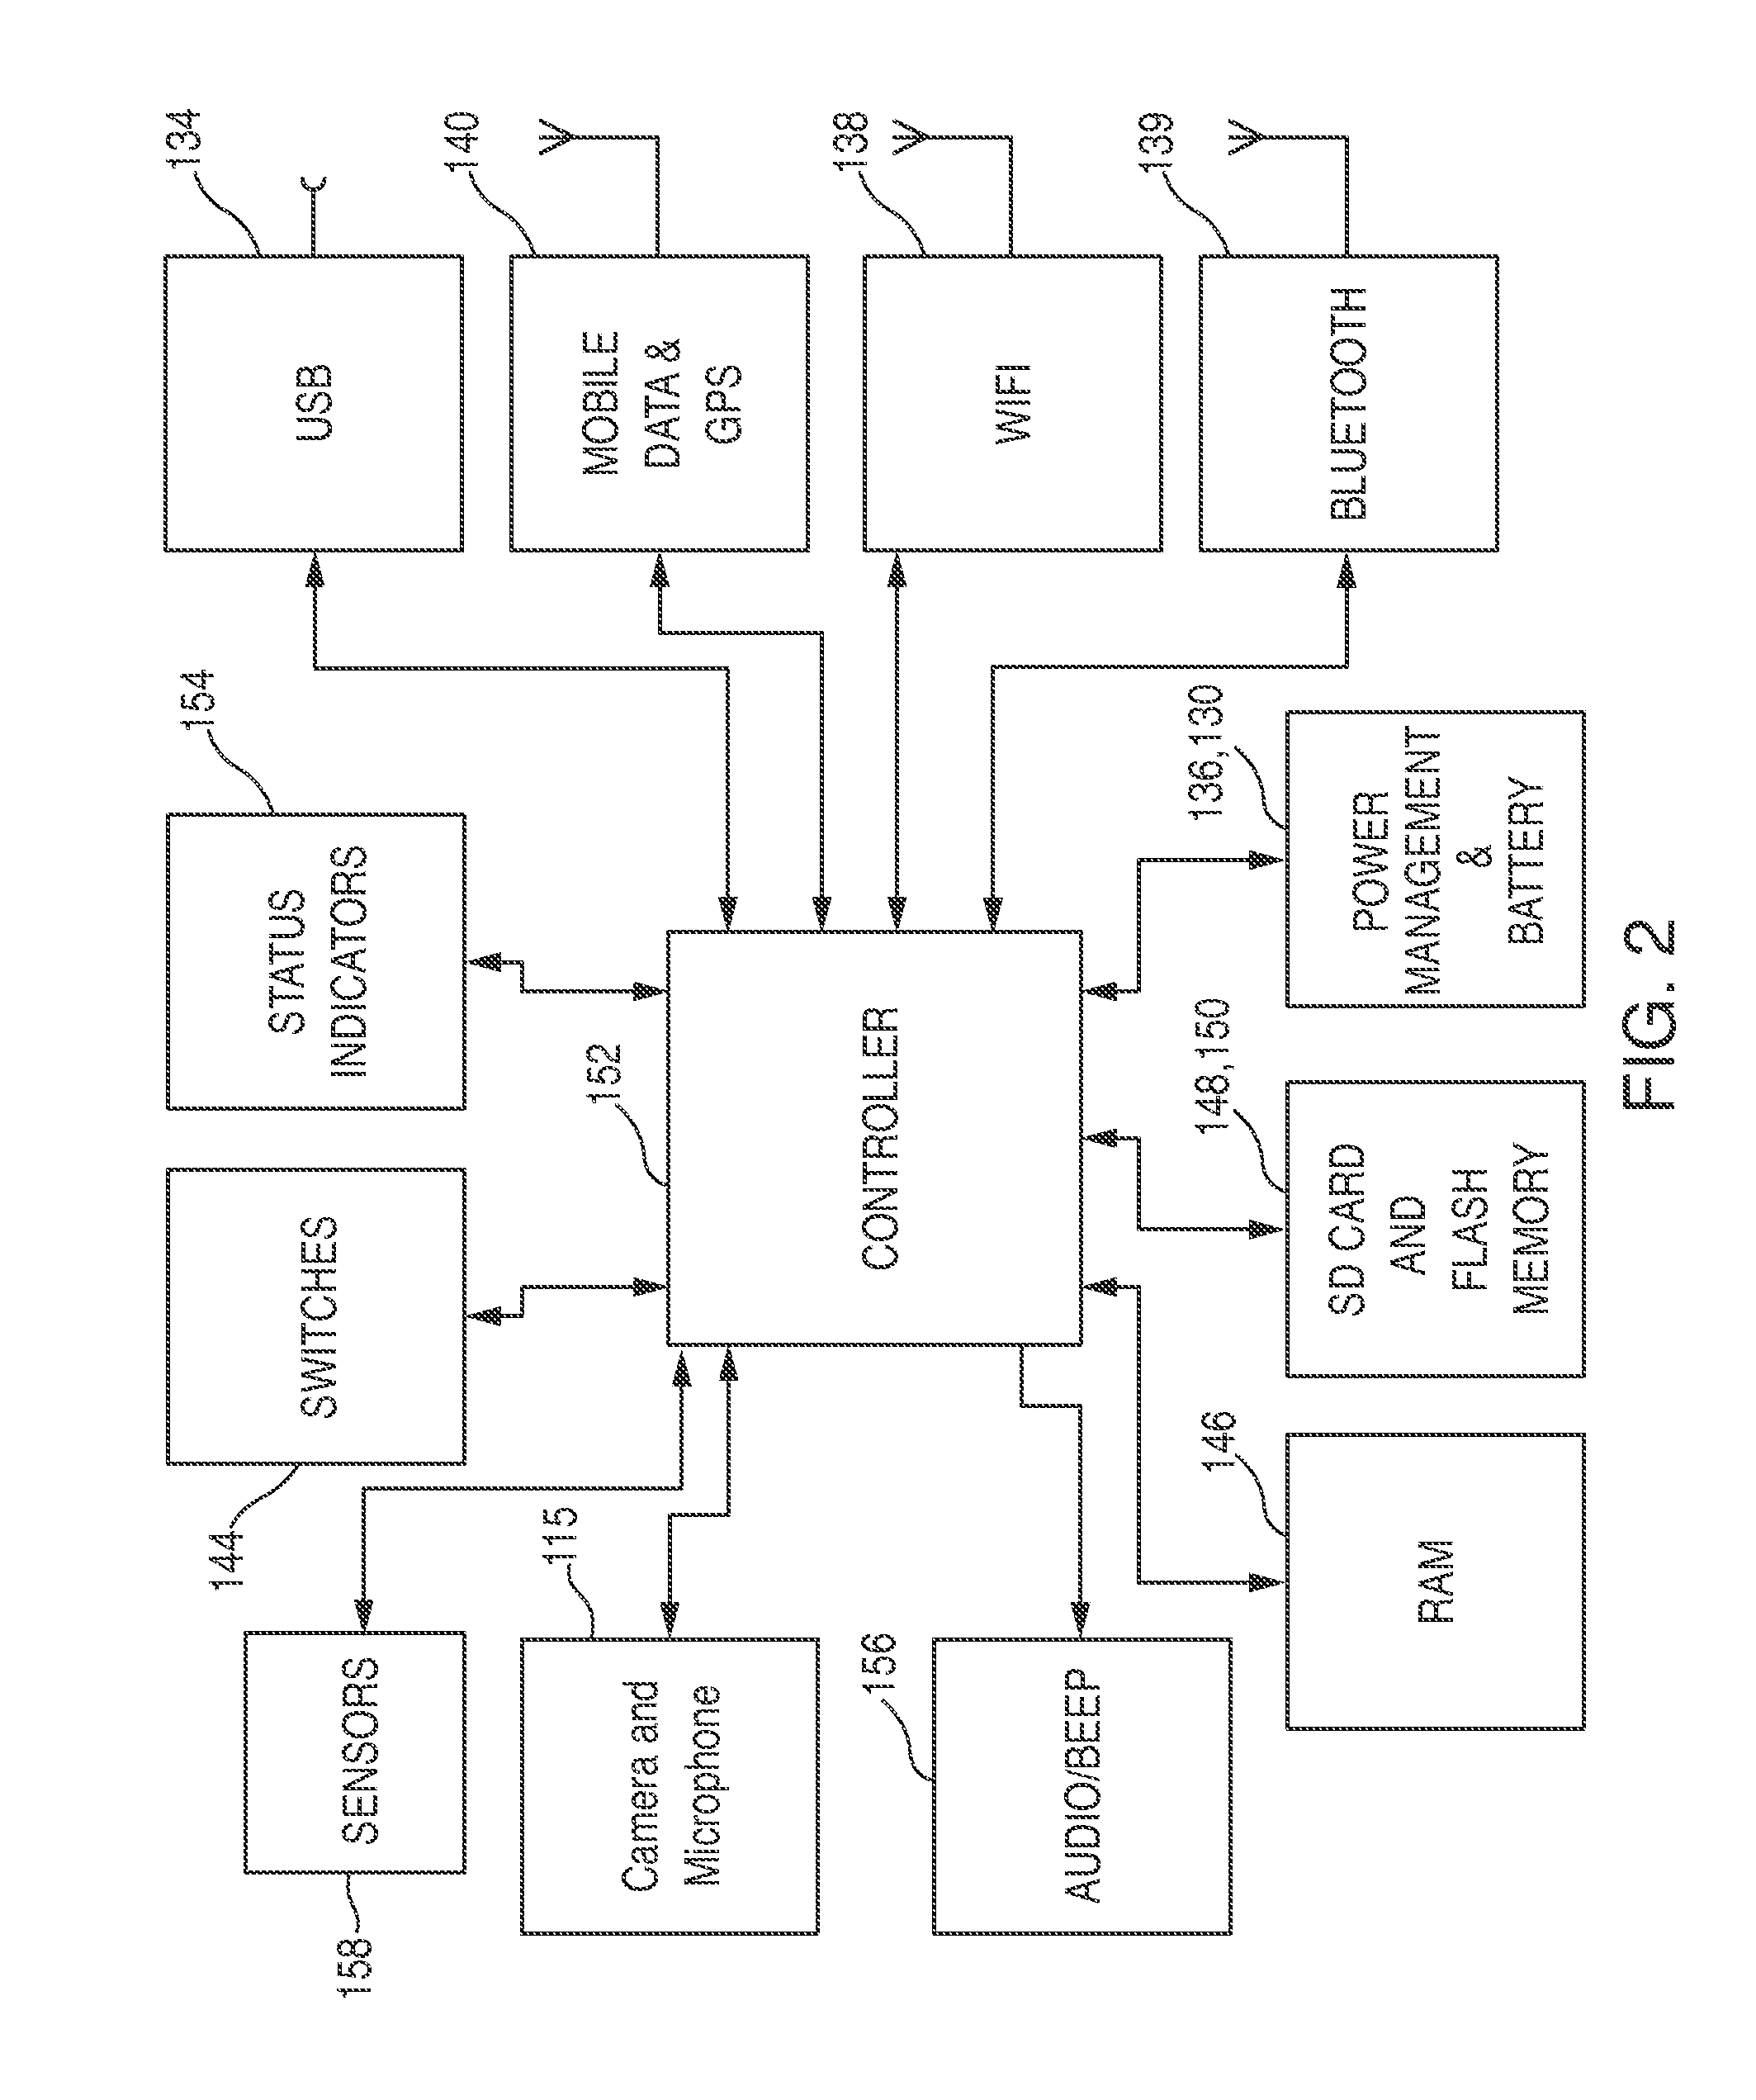 Firearm-mounted camera device with networked control and administration system and method